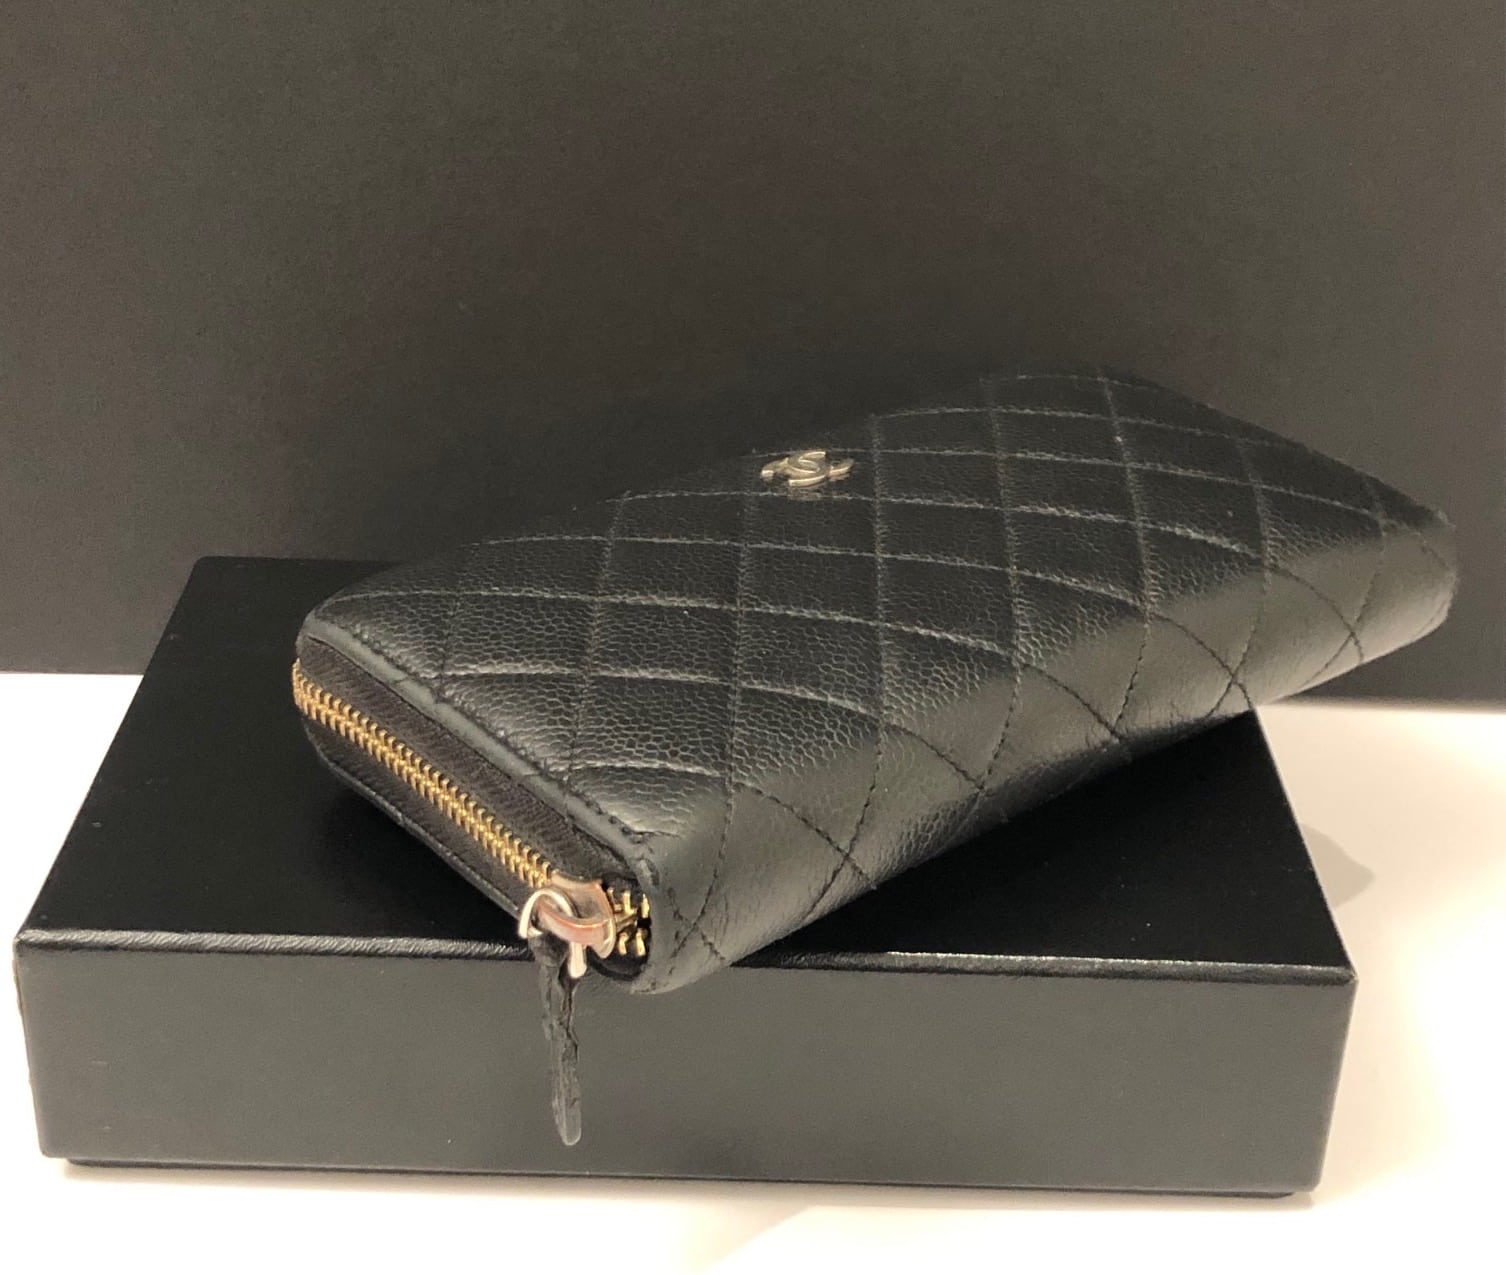 CHANEL Wallet Black Caviar Quilted CC Logo Long Vintage - Chelsea